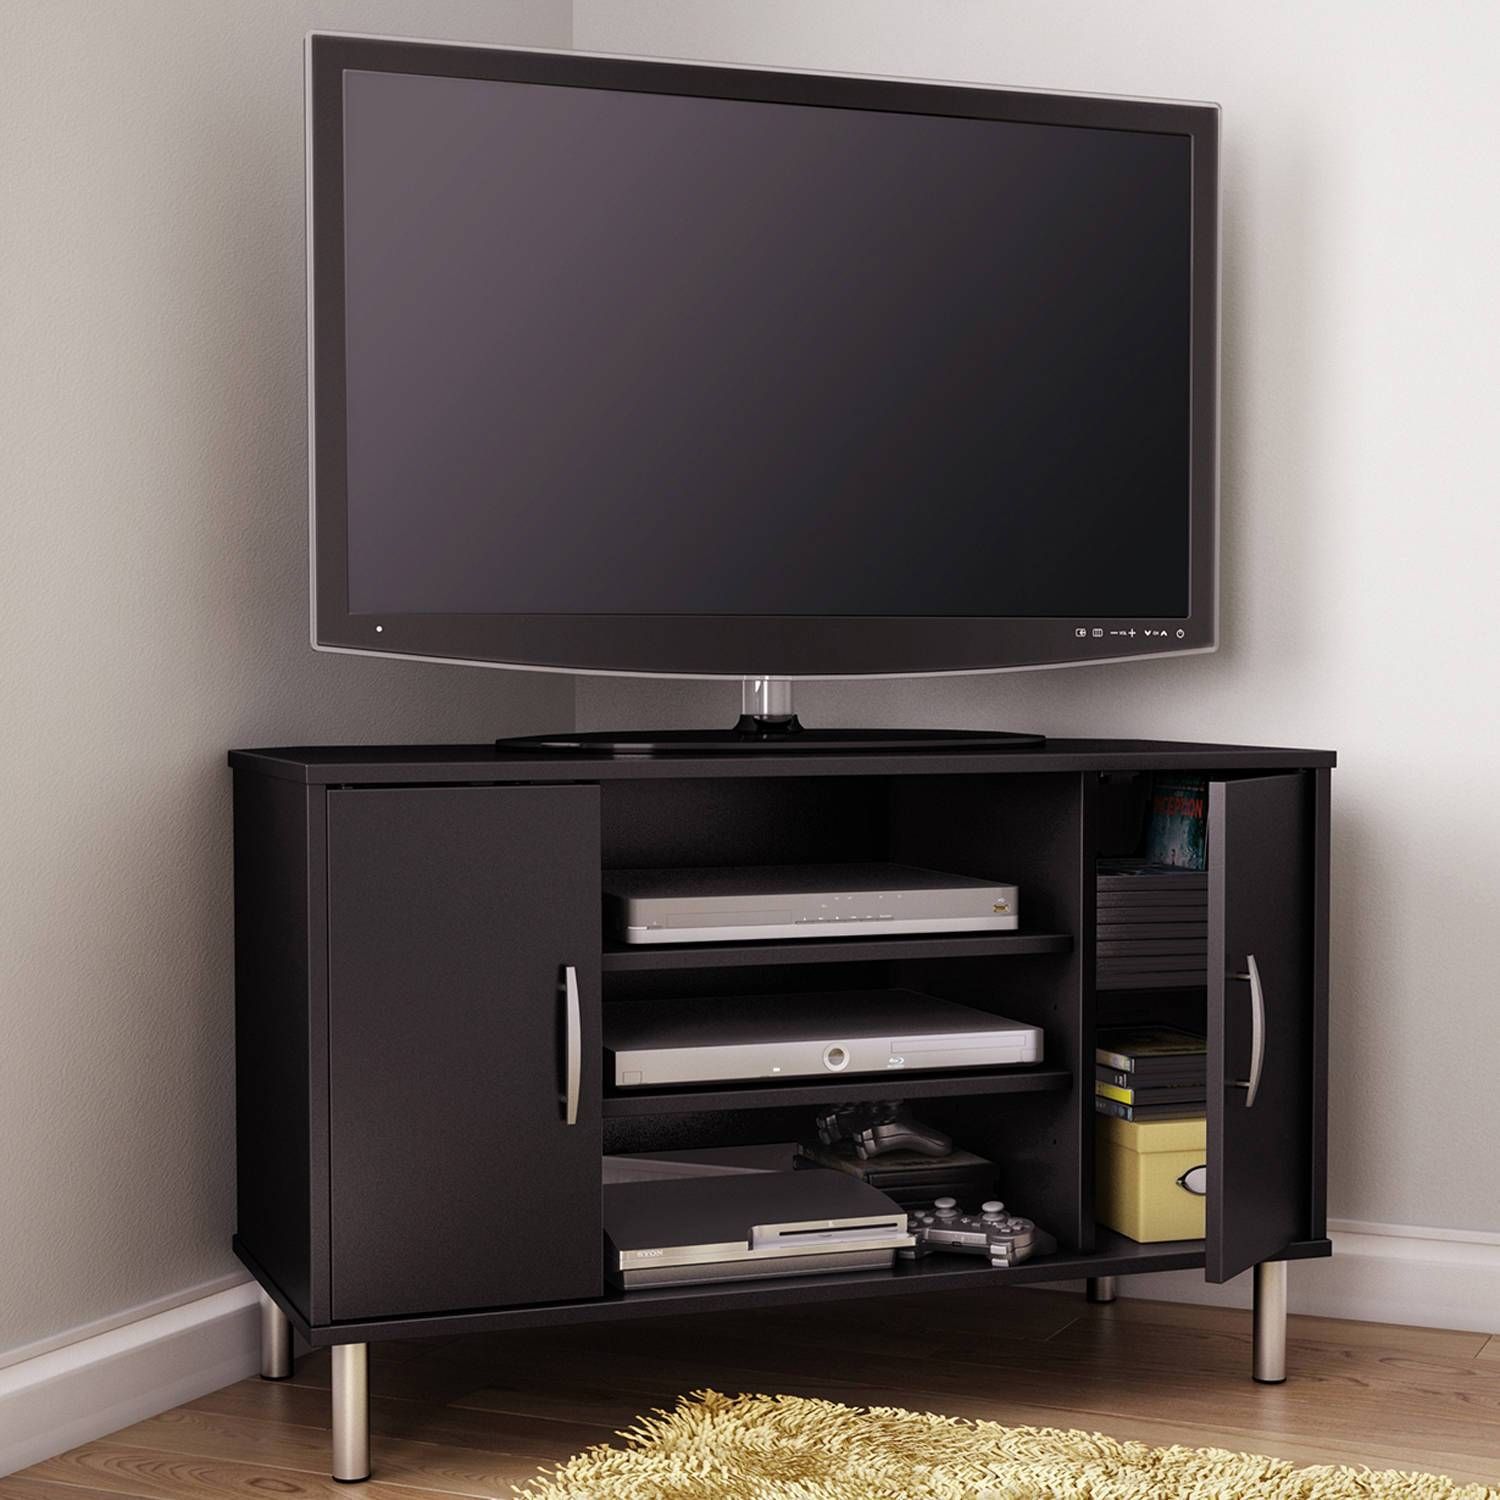 5 Steps For Choosing The Right Size Corner Tv Stand – Cape Cod Within Tv Stands For Corners (View 2 of 15)